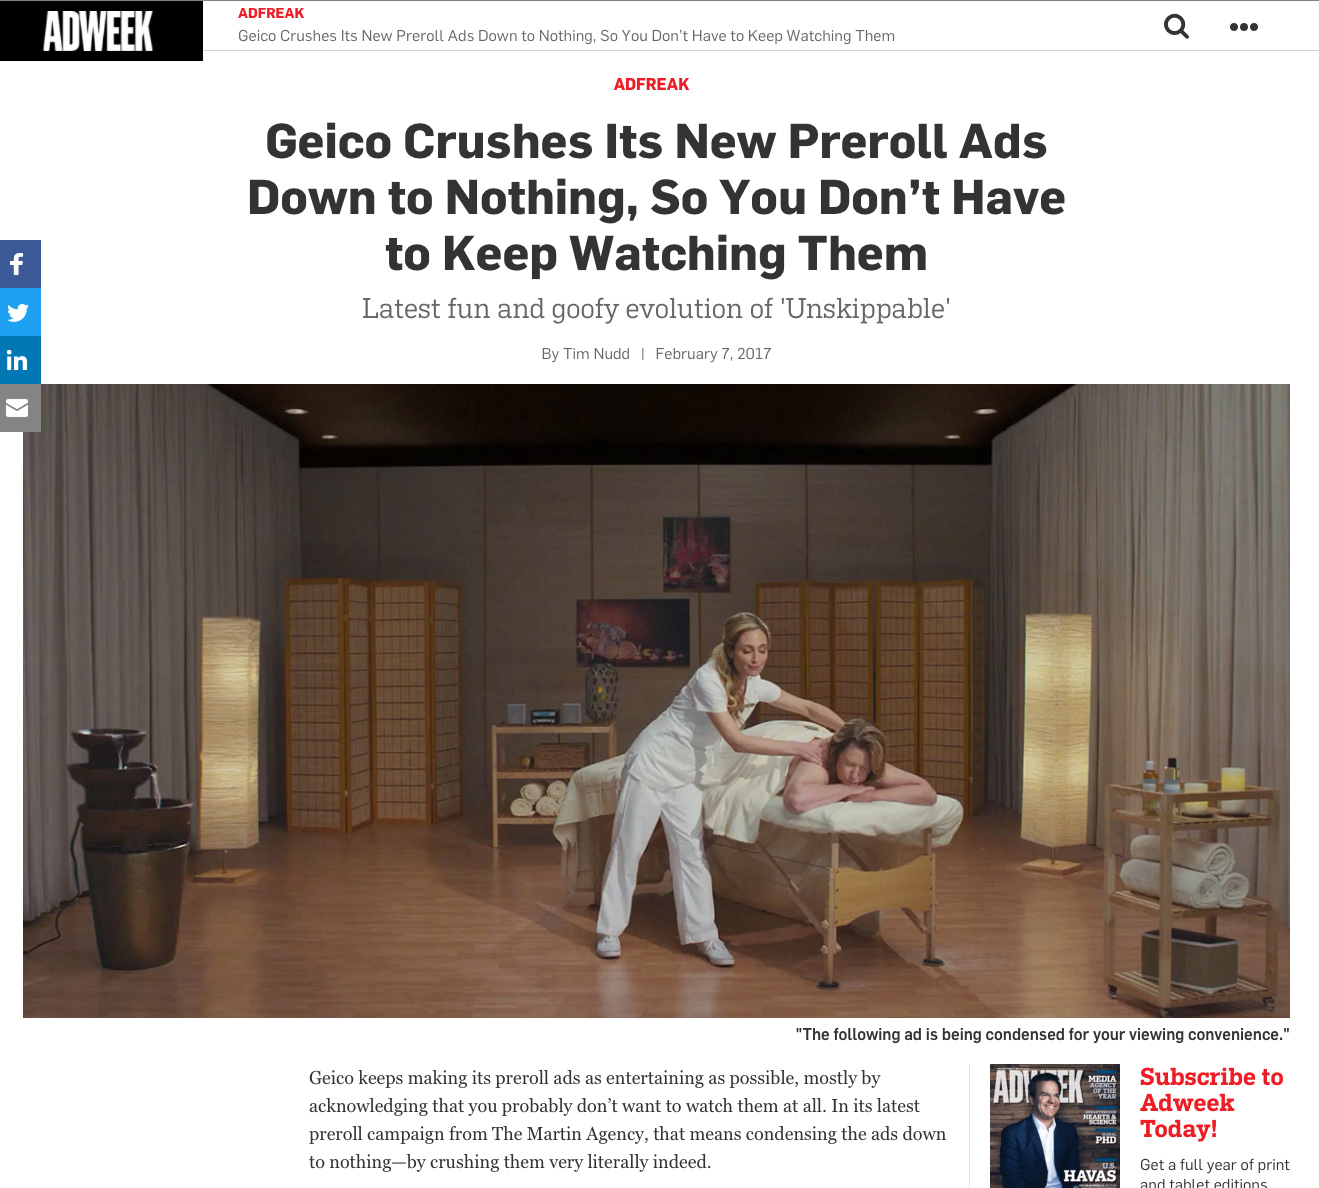 Geico Crushes Its New Preroll Ads Down to Nothing